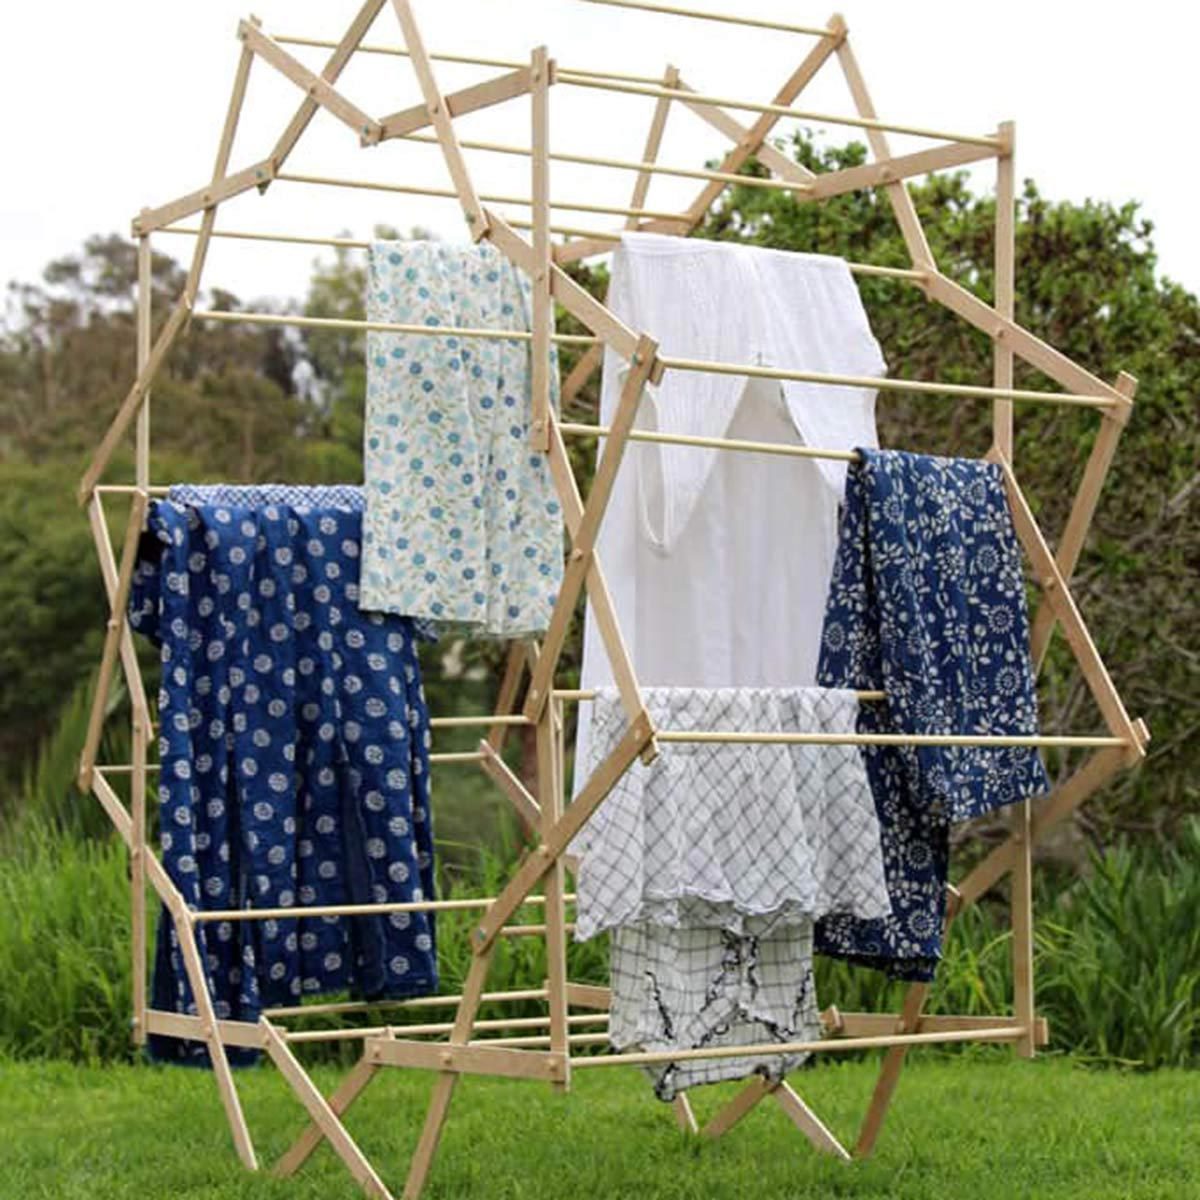 How To Dry Clothes Without A Dryer The Family Handyman | atelier-yuwa ...